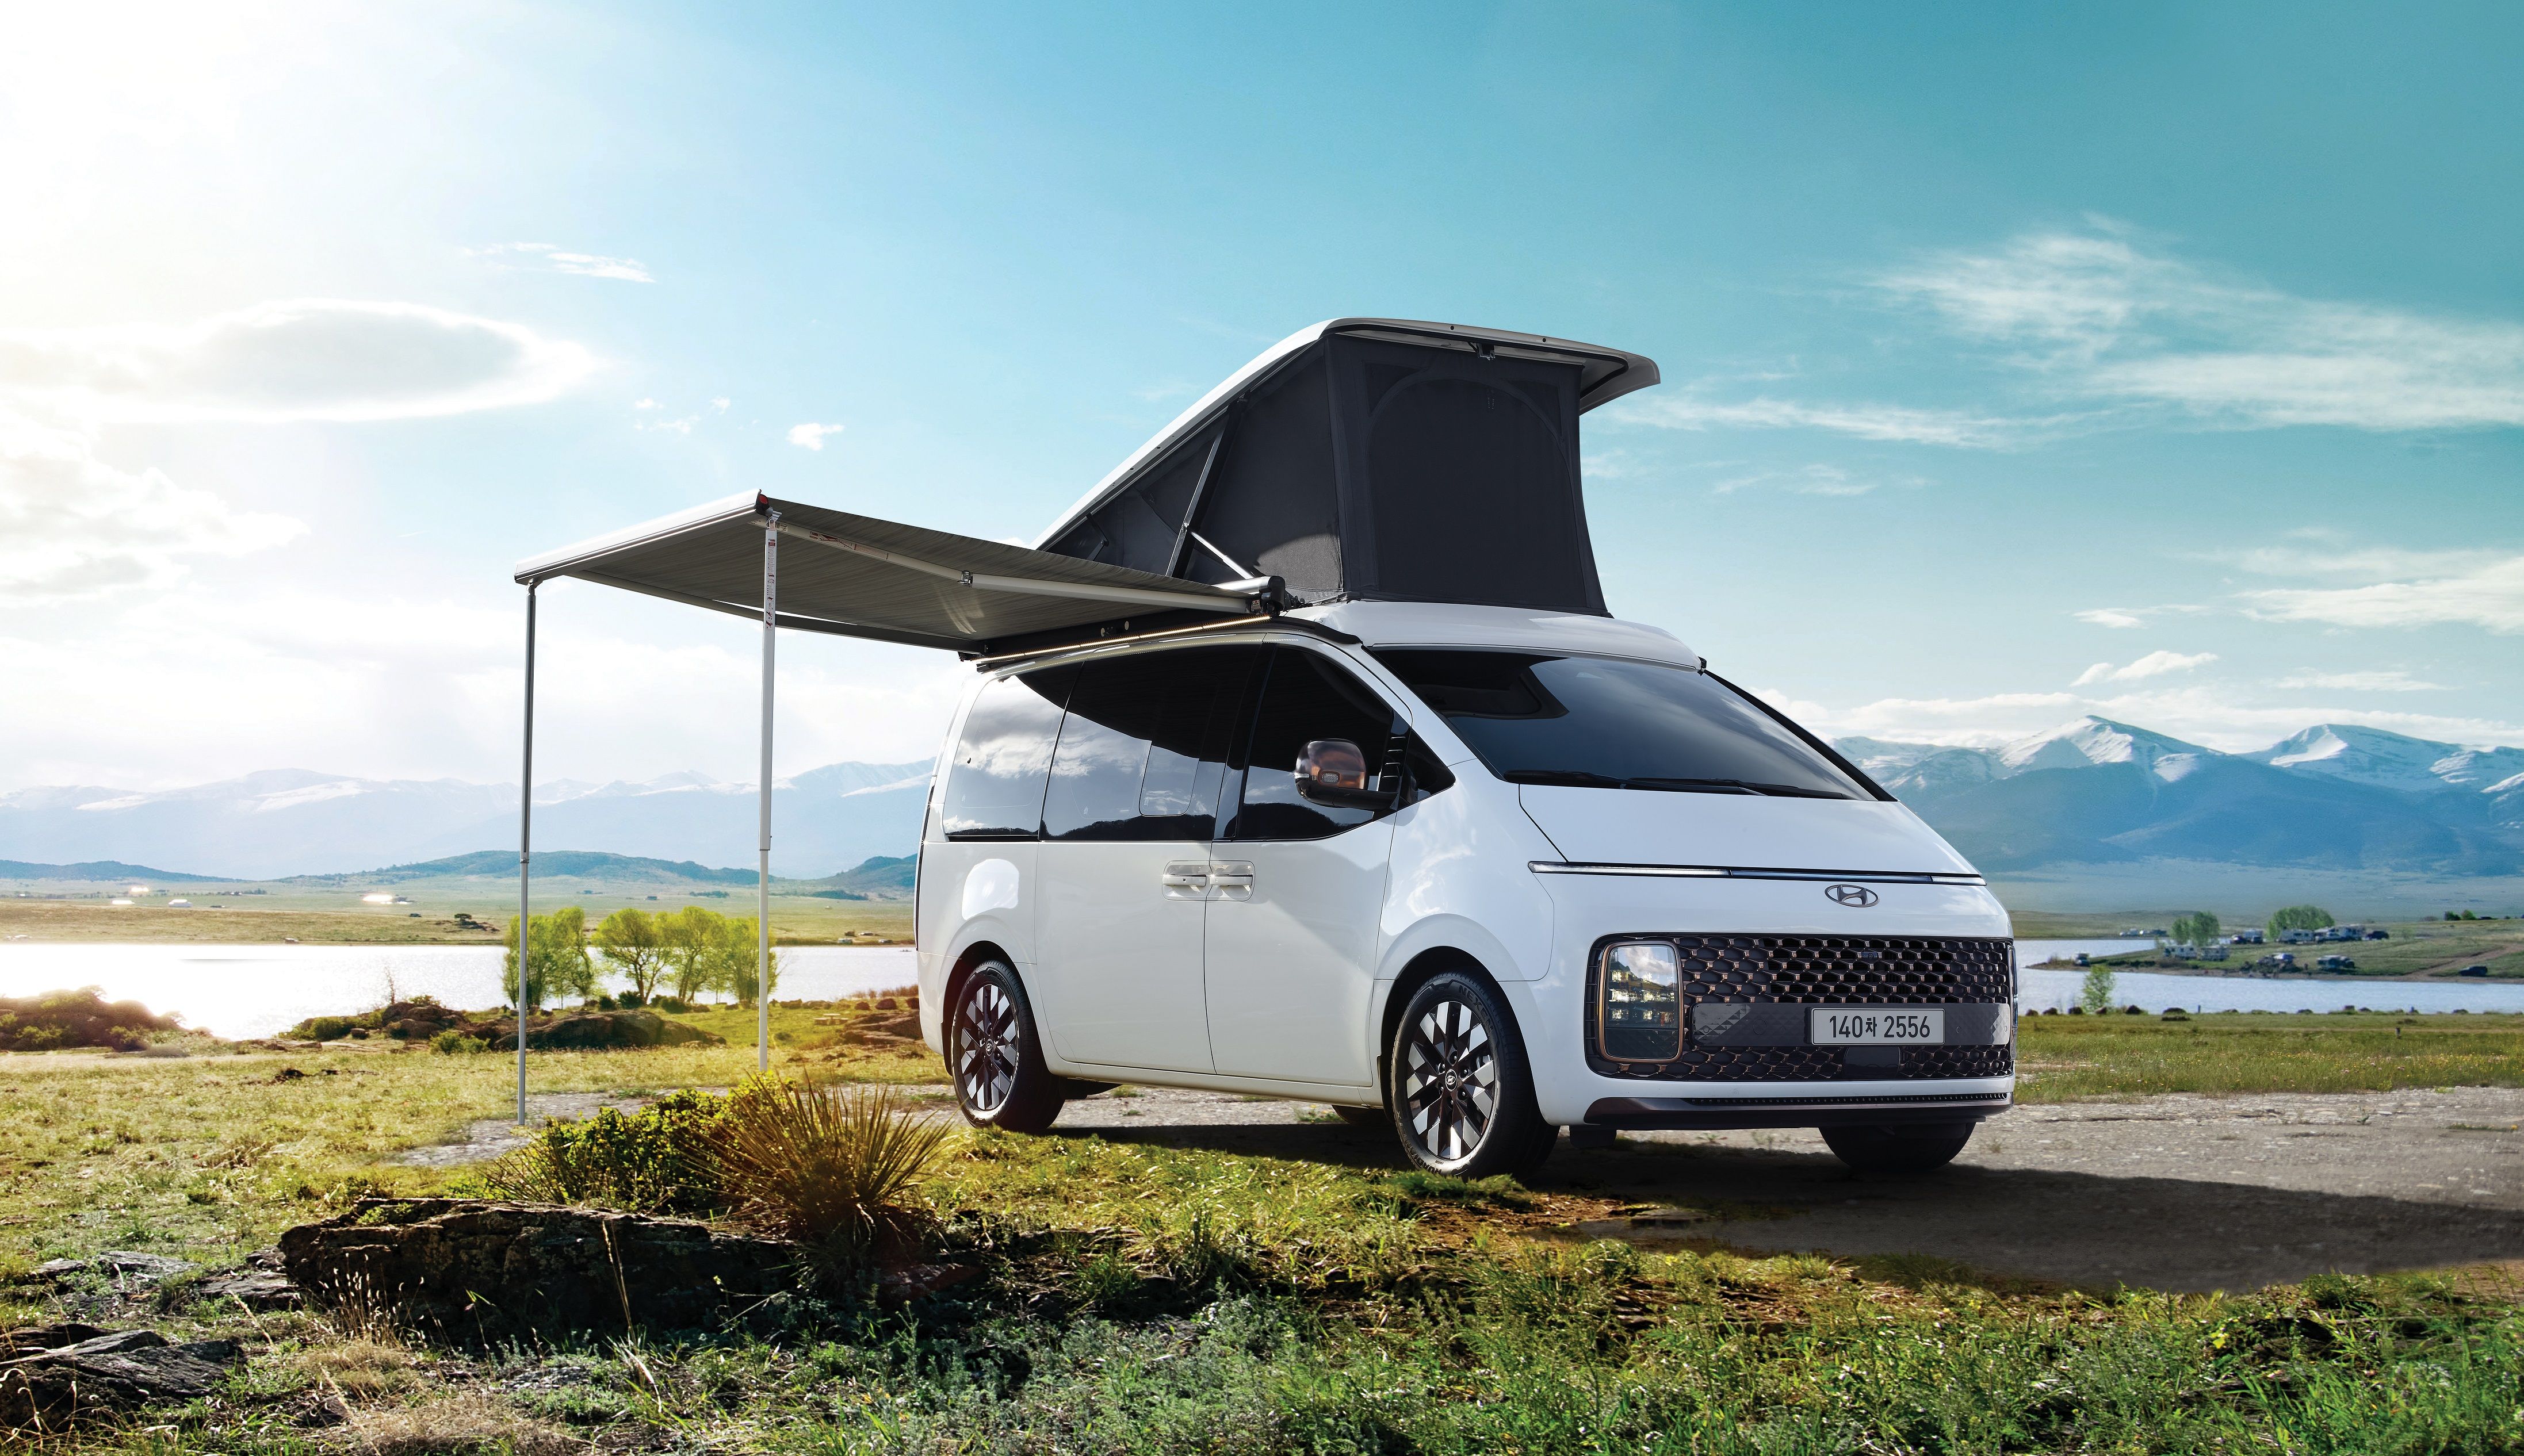 Hyundai Staria Now Available As An Awesome Pop-Top Camper Van